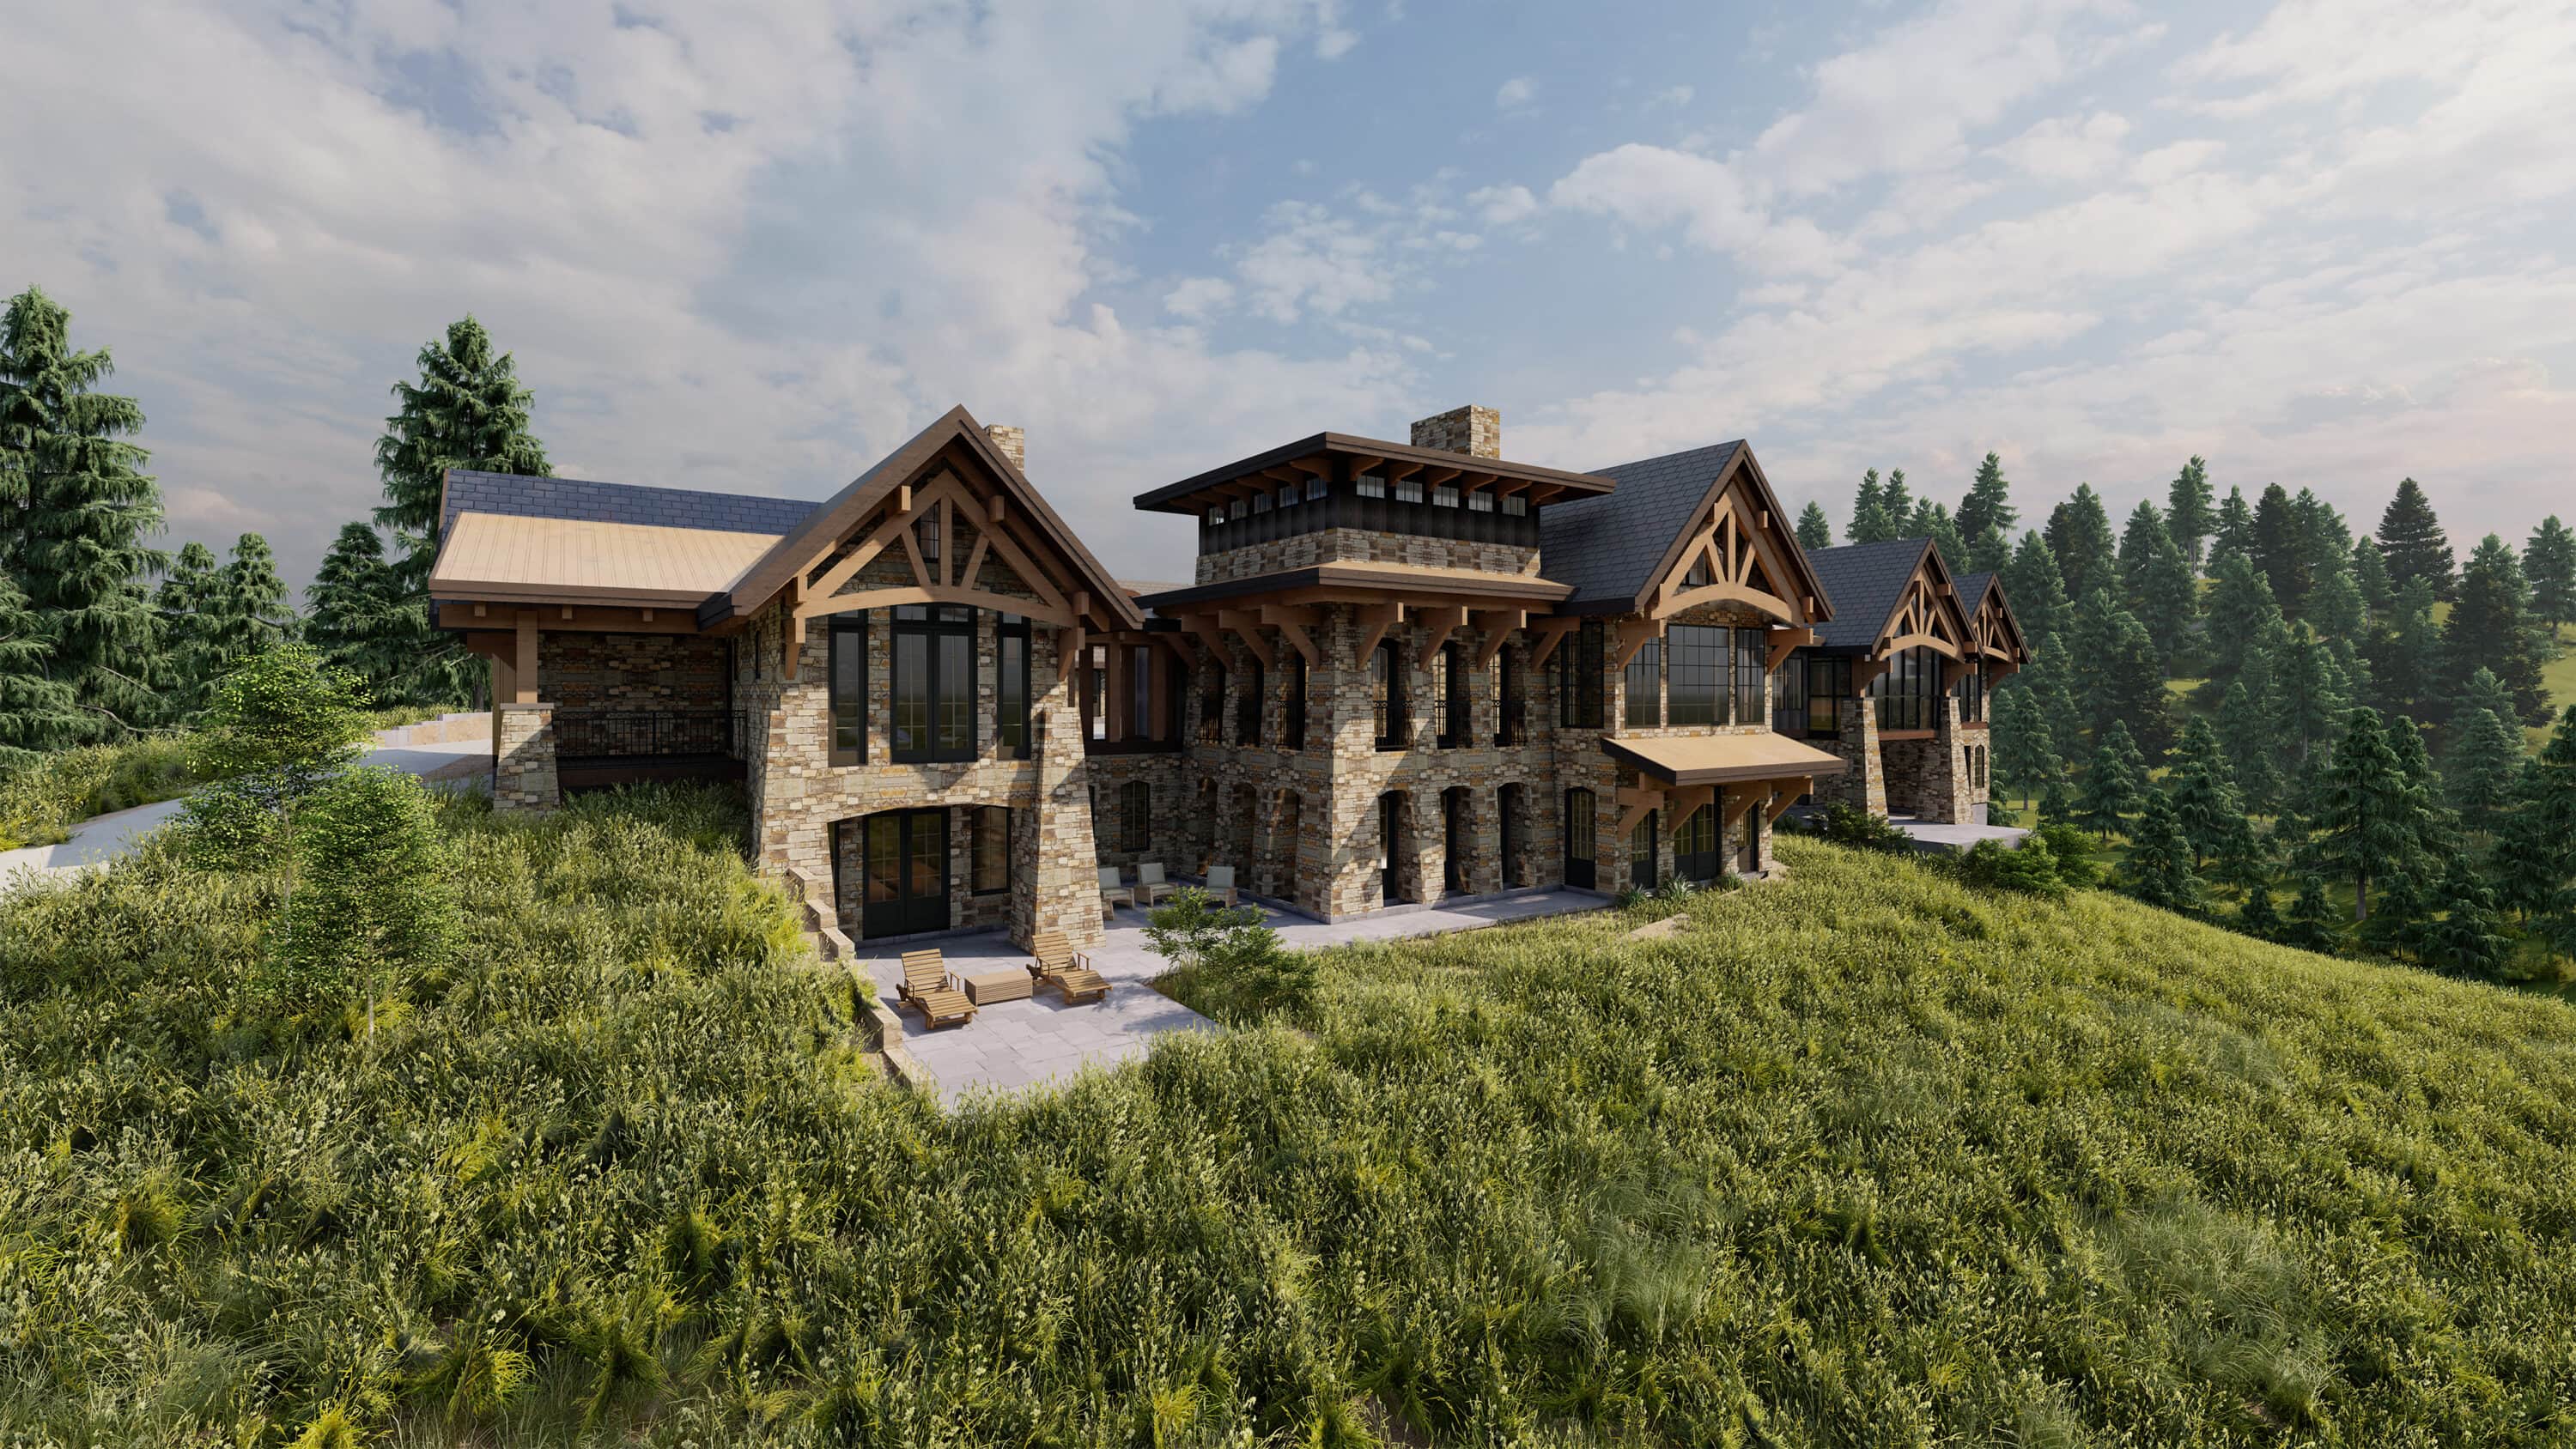 Lion Mountain Residence Whitefish Montana, Alpine Chalet Style features with town design, overlooking mountainside